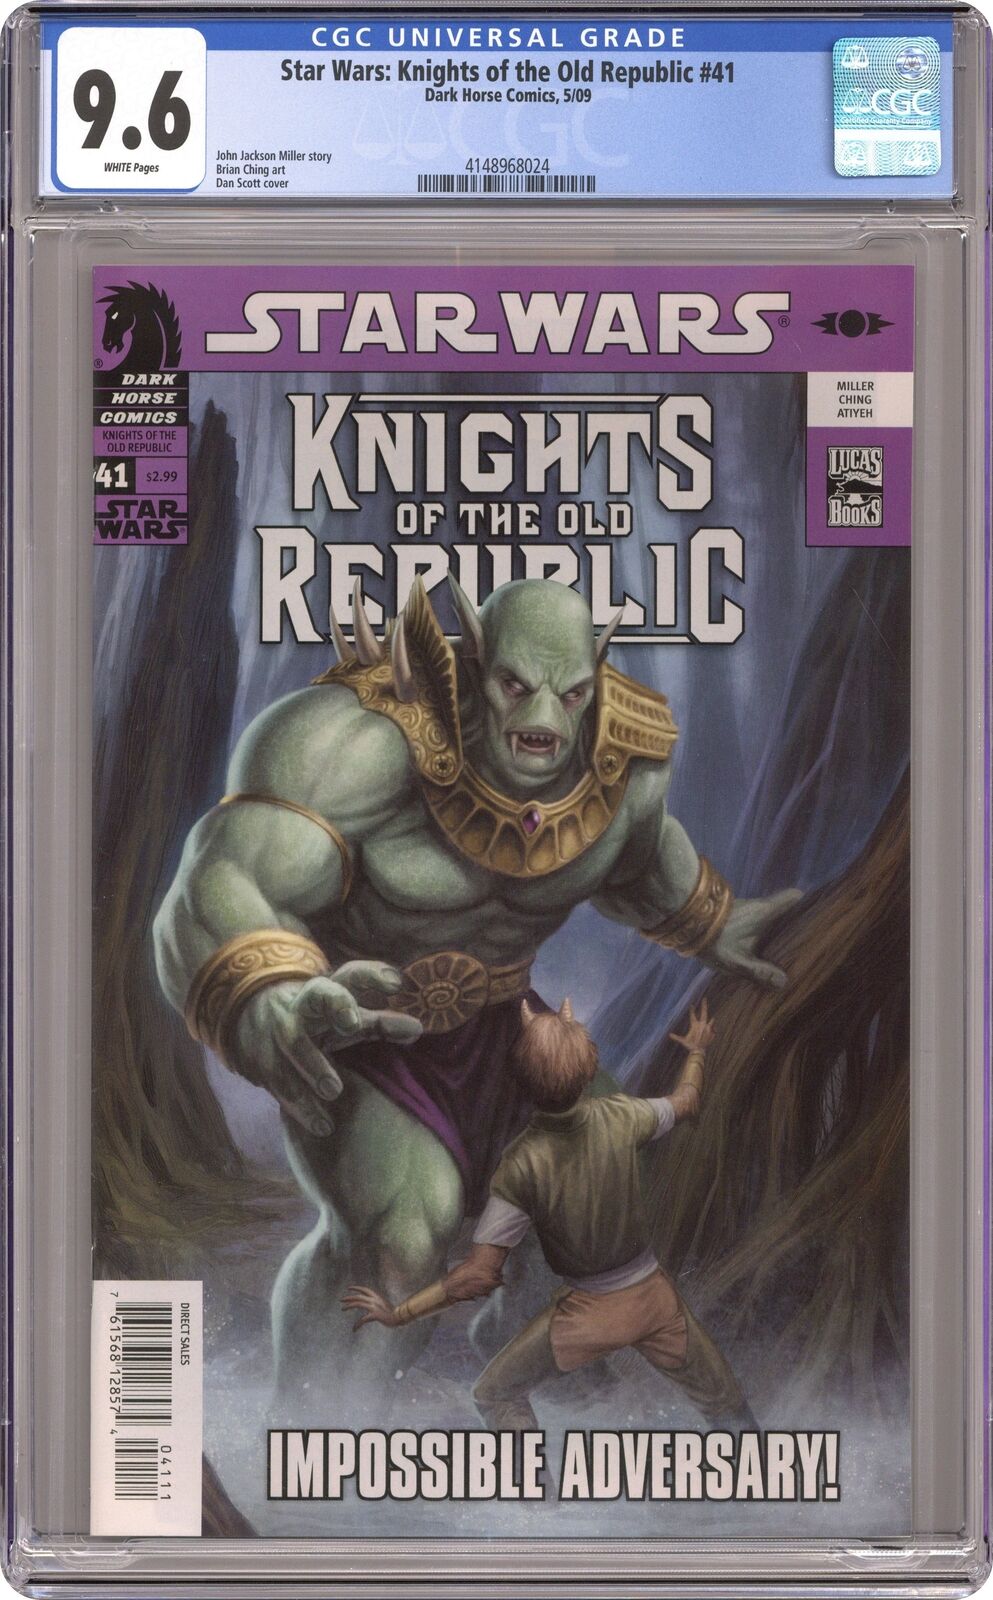 Star Wars Knights of the Old Republic #41 CGC 9.6 2009 4148968024